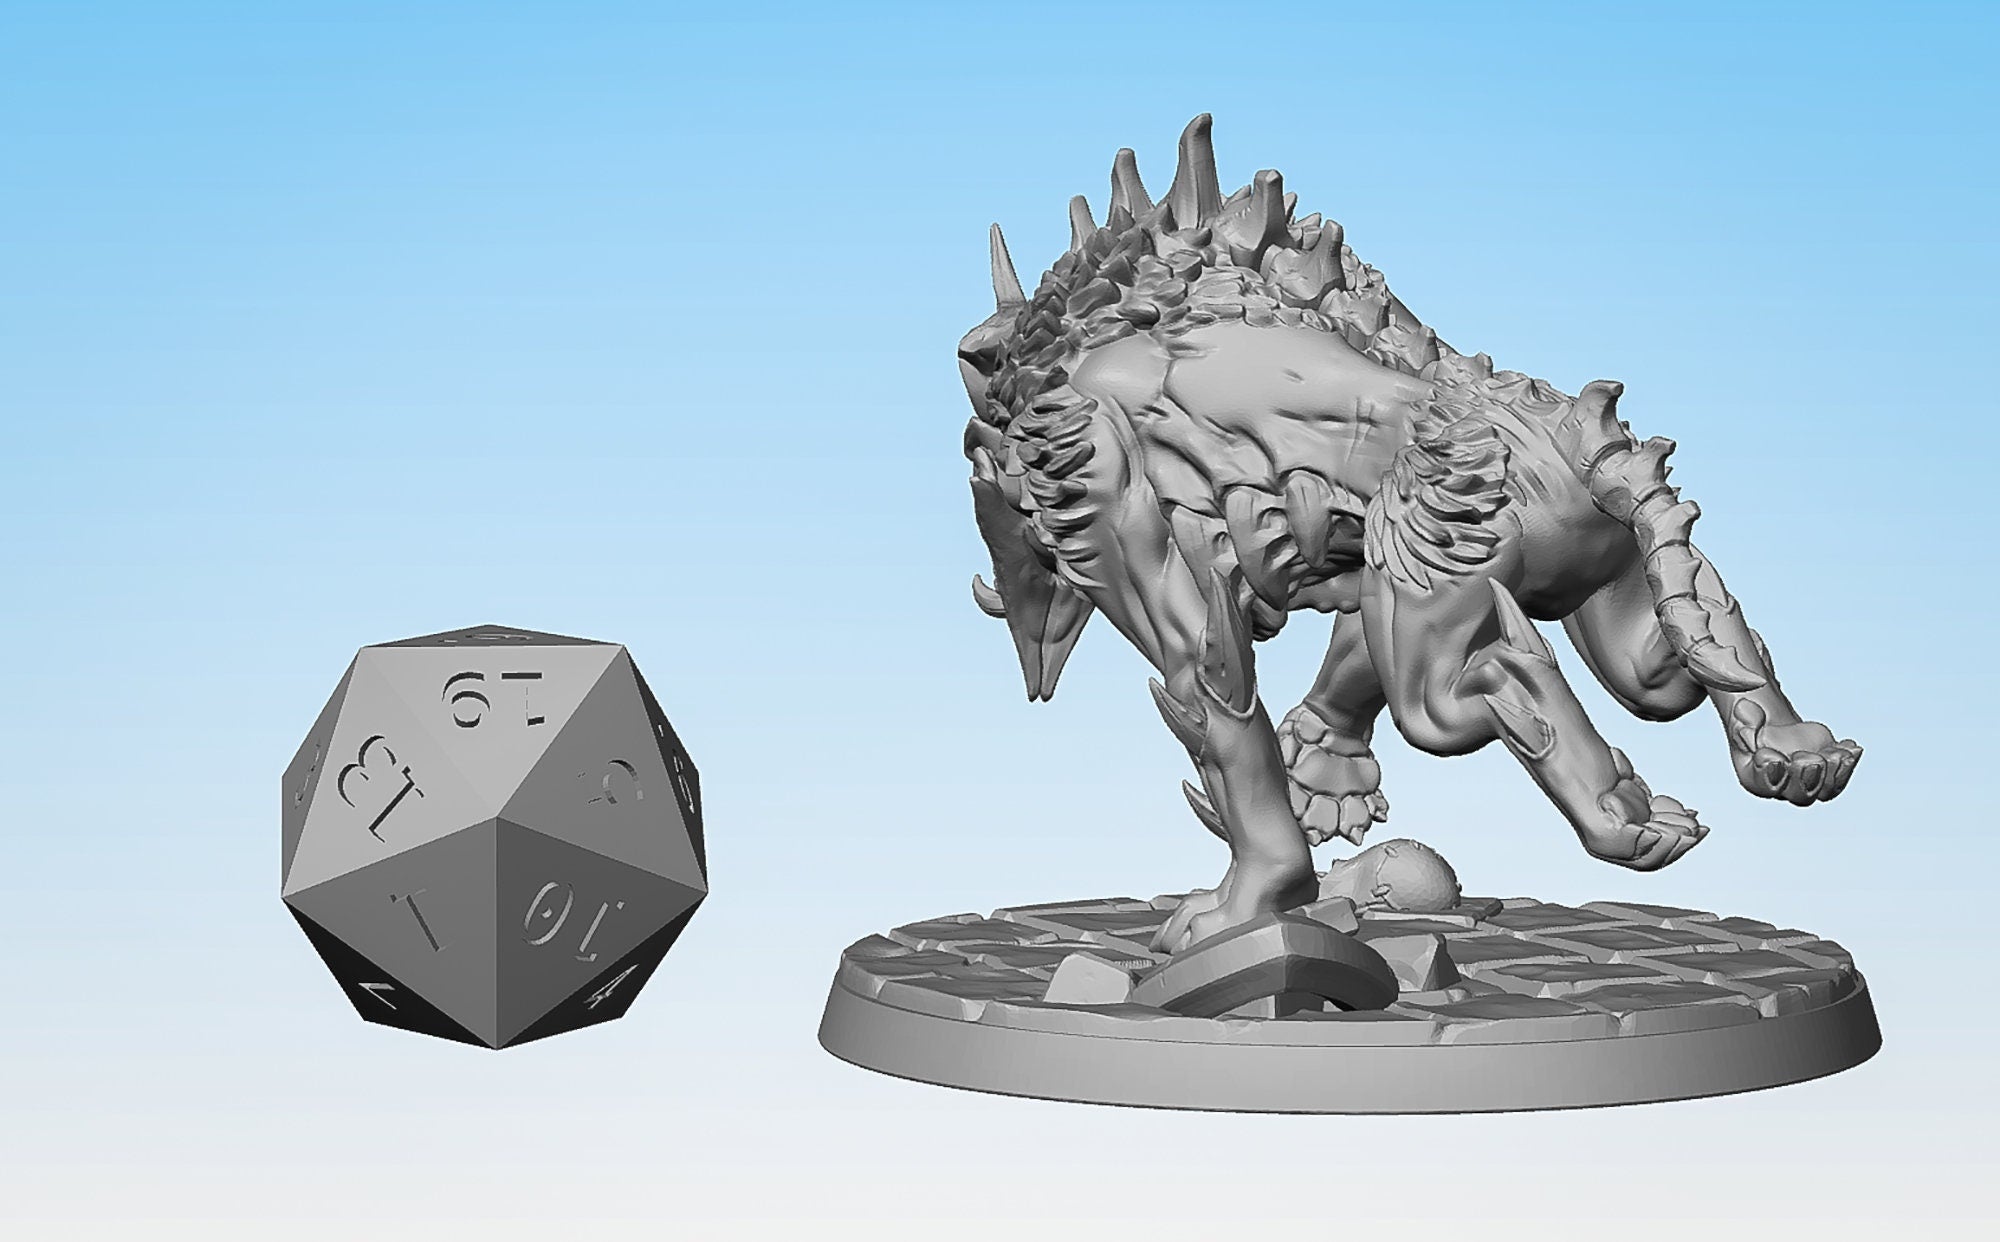 BAALS DEMONHOUND "A"-Role Playing Miniatures